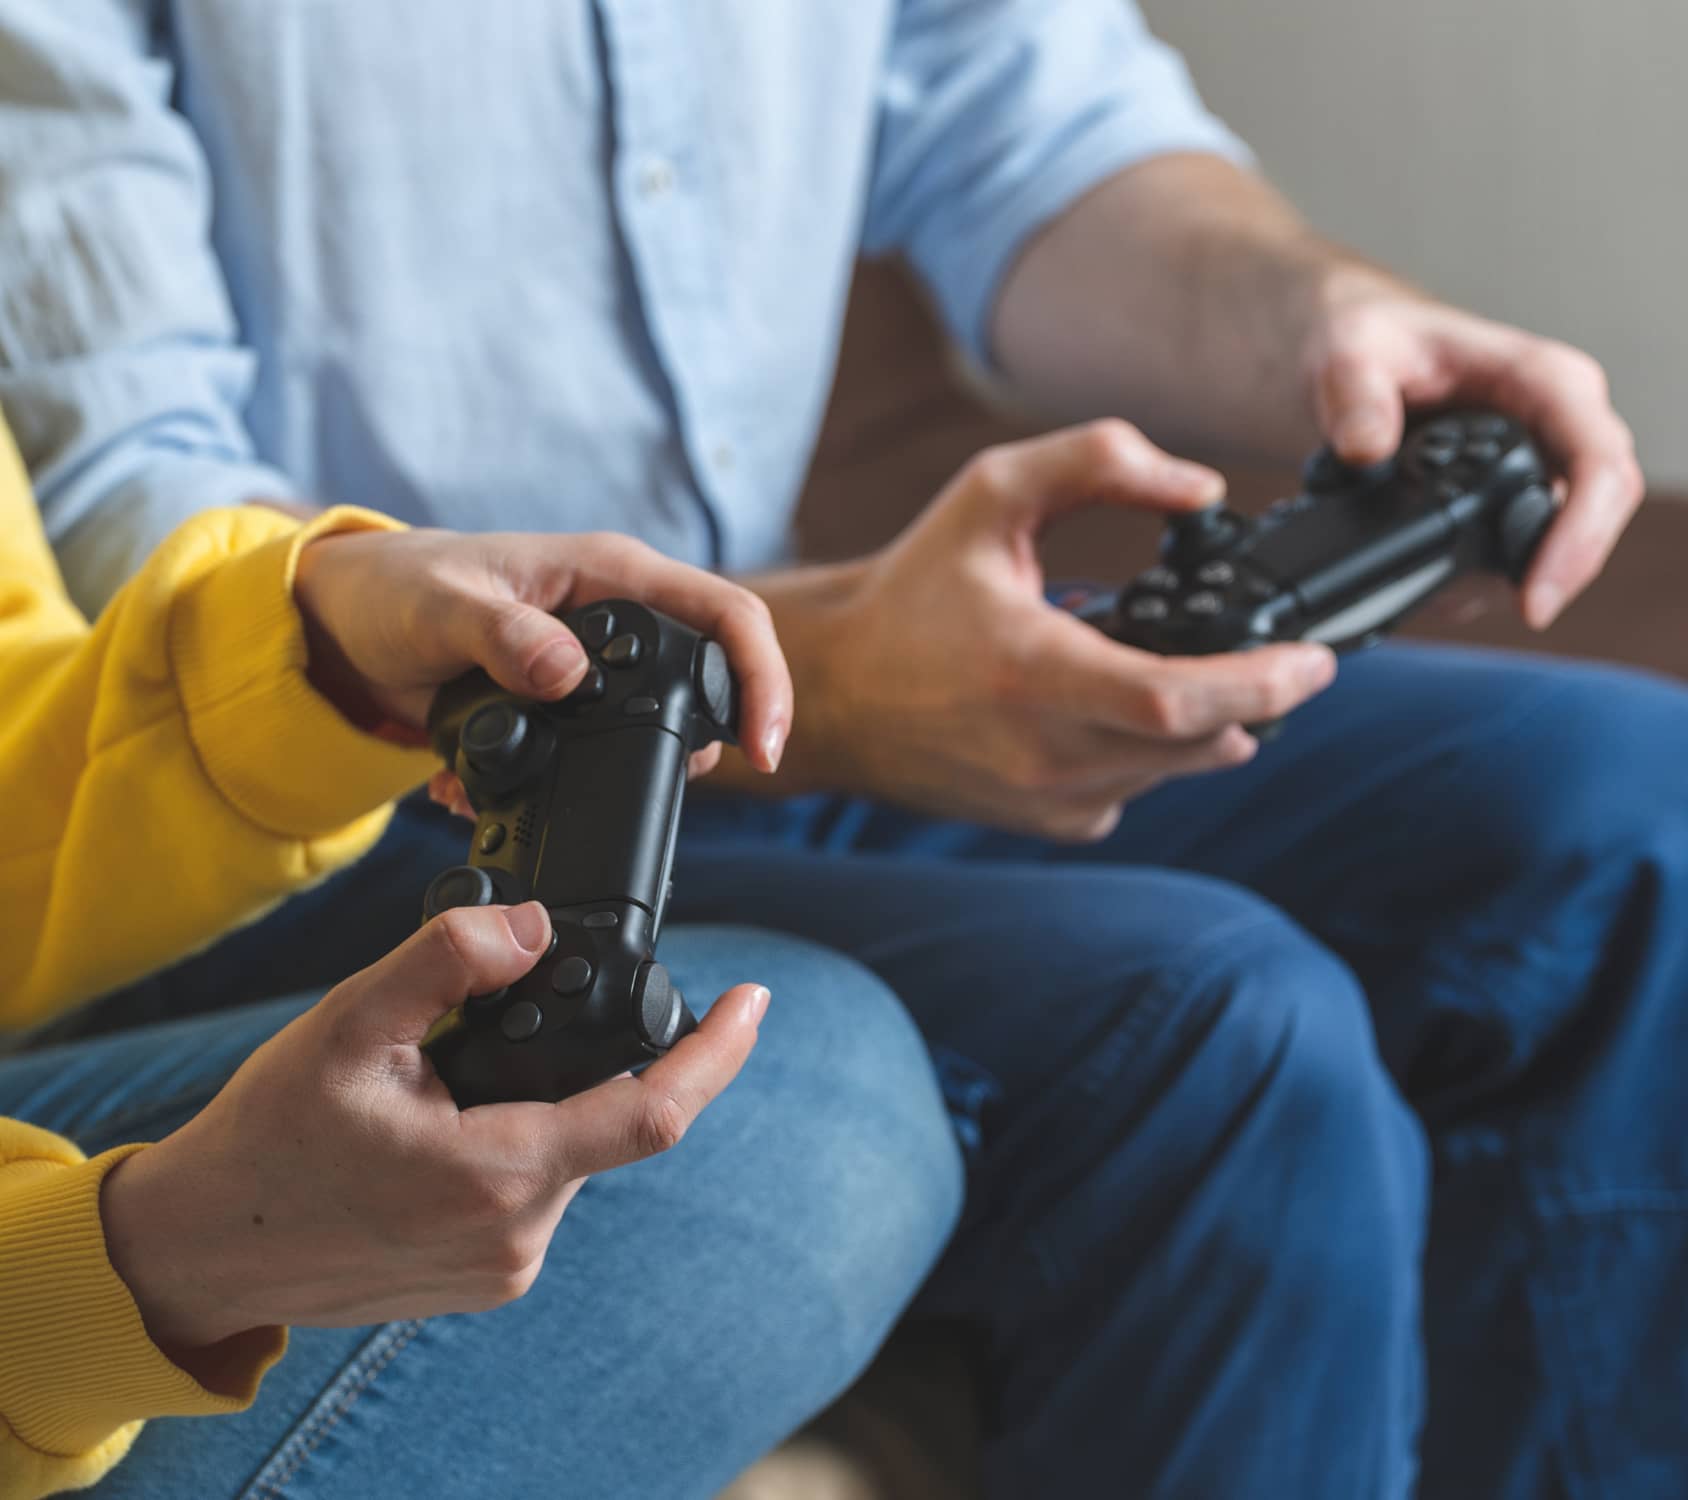 People playing a console game